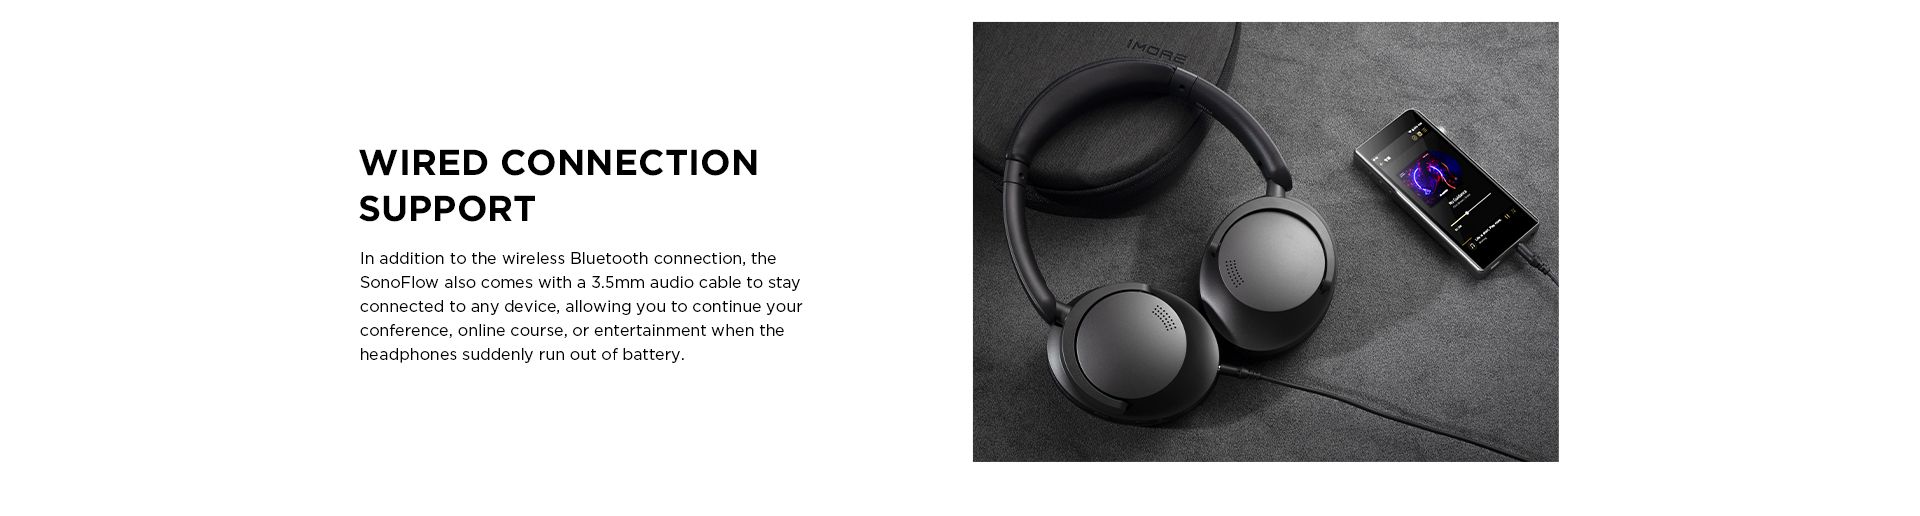 1MORE-SonoFlow-Active-Noise-Cancelling-Headphones-Bluetooth-Headphones-with-LDAC-for-Hi-Res-Wireless-Audio-70H-Playtime-Clear-Calls-Silver-26